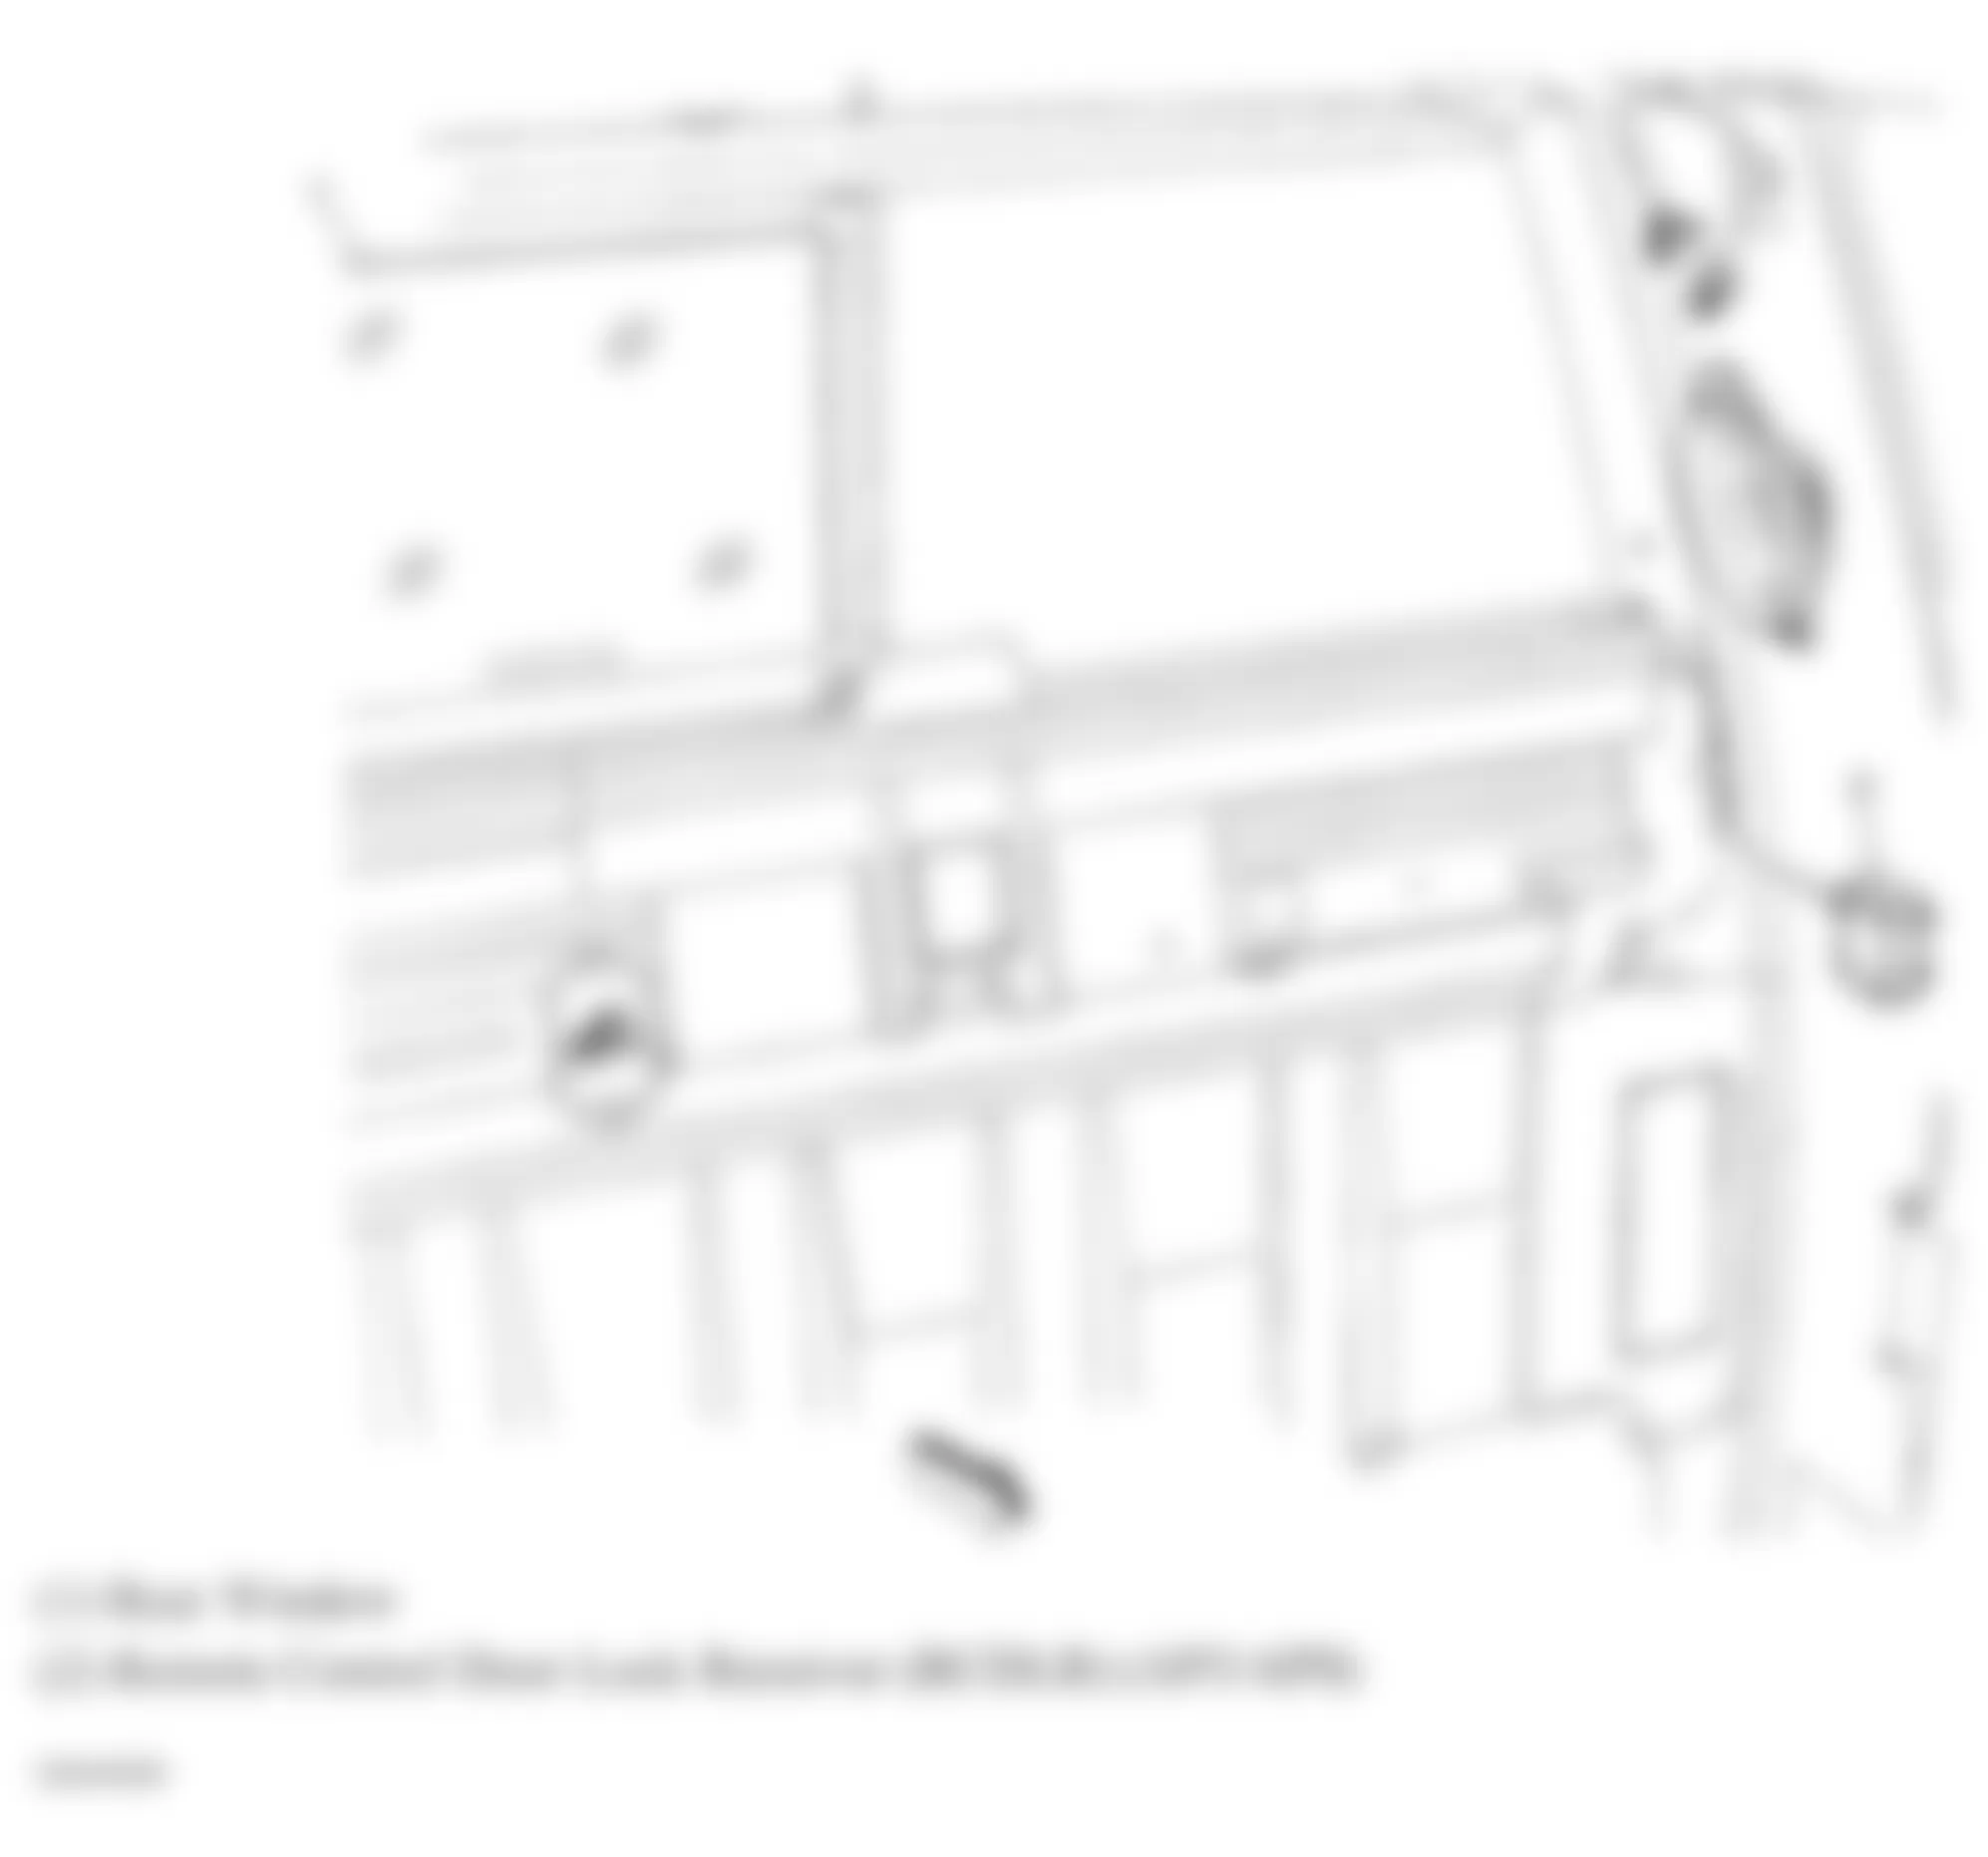 GMC Sierra 3500 HD 2008 - Component Locations -  Left Rear Of Passenger Compartment